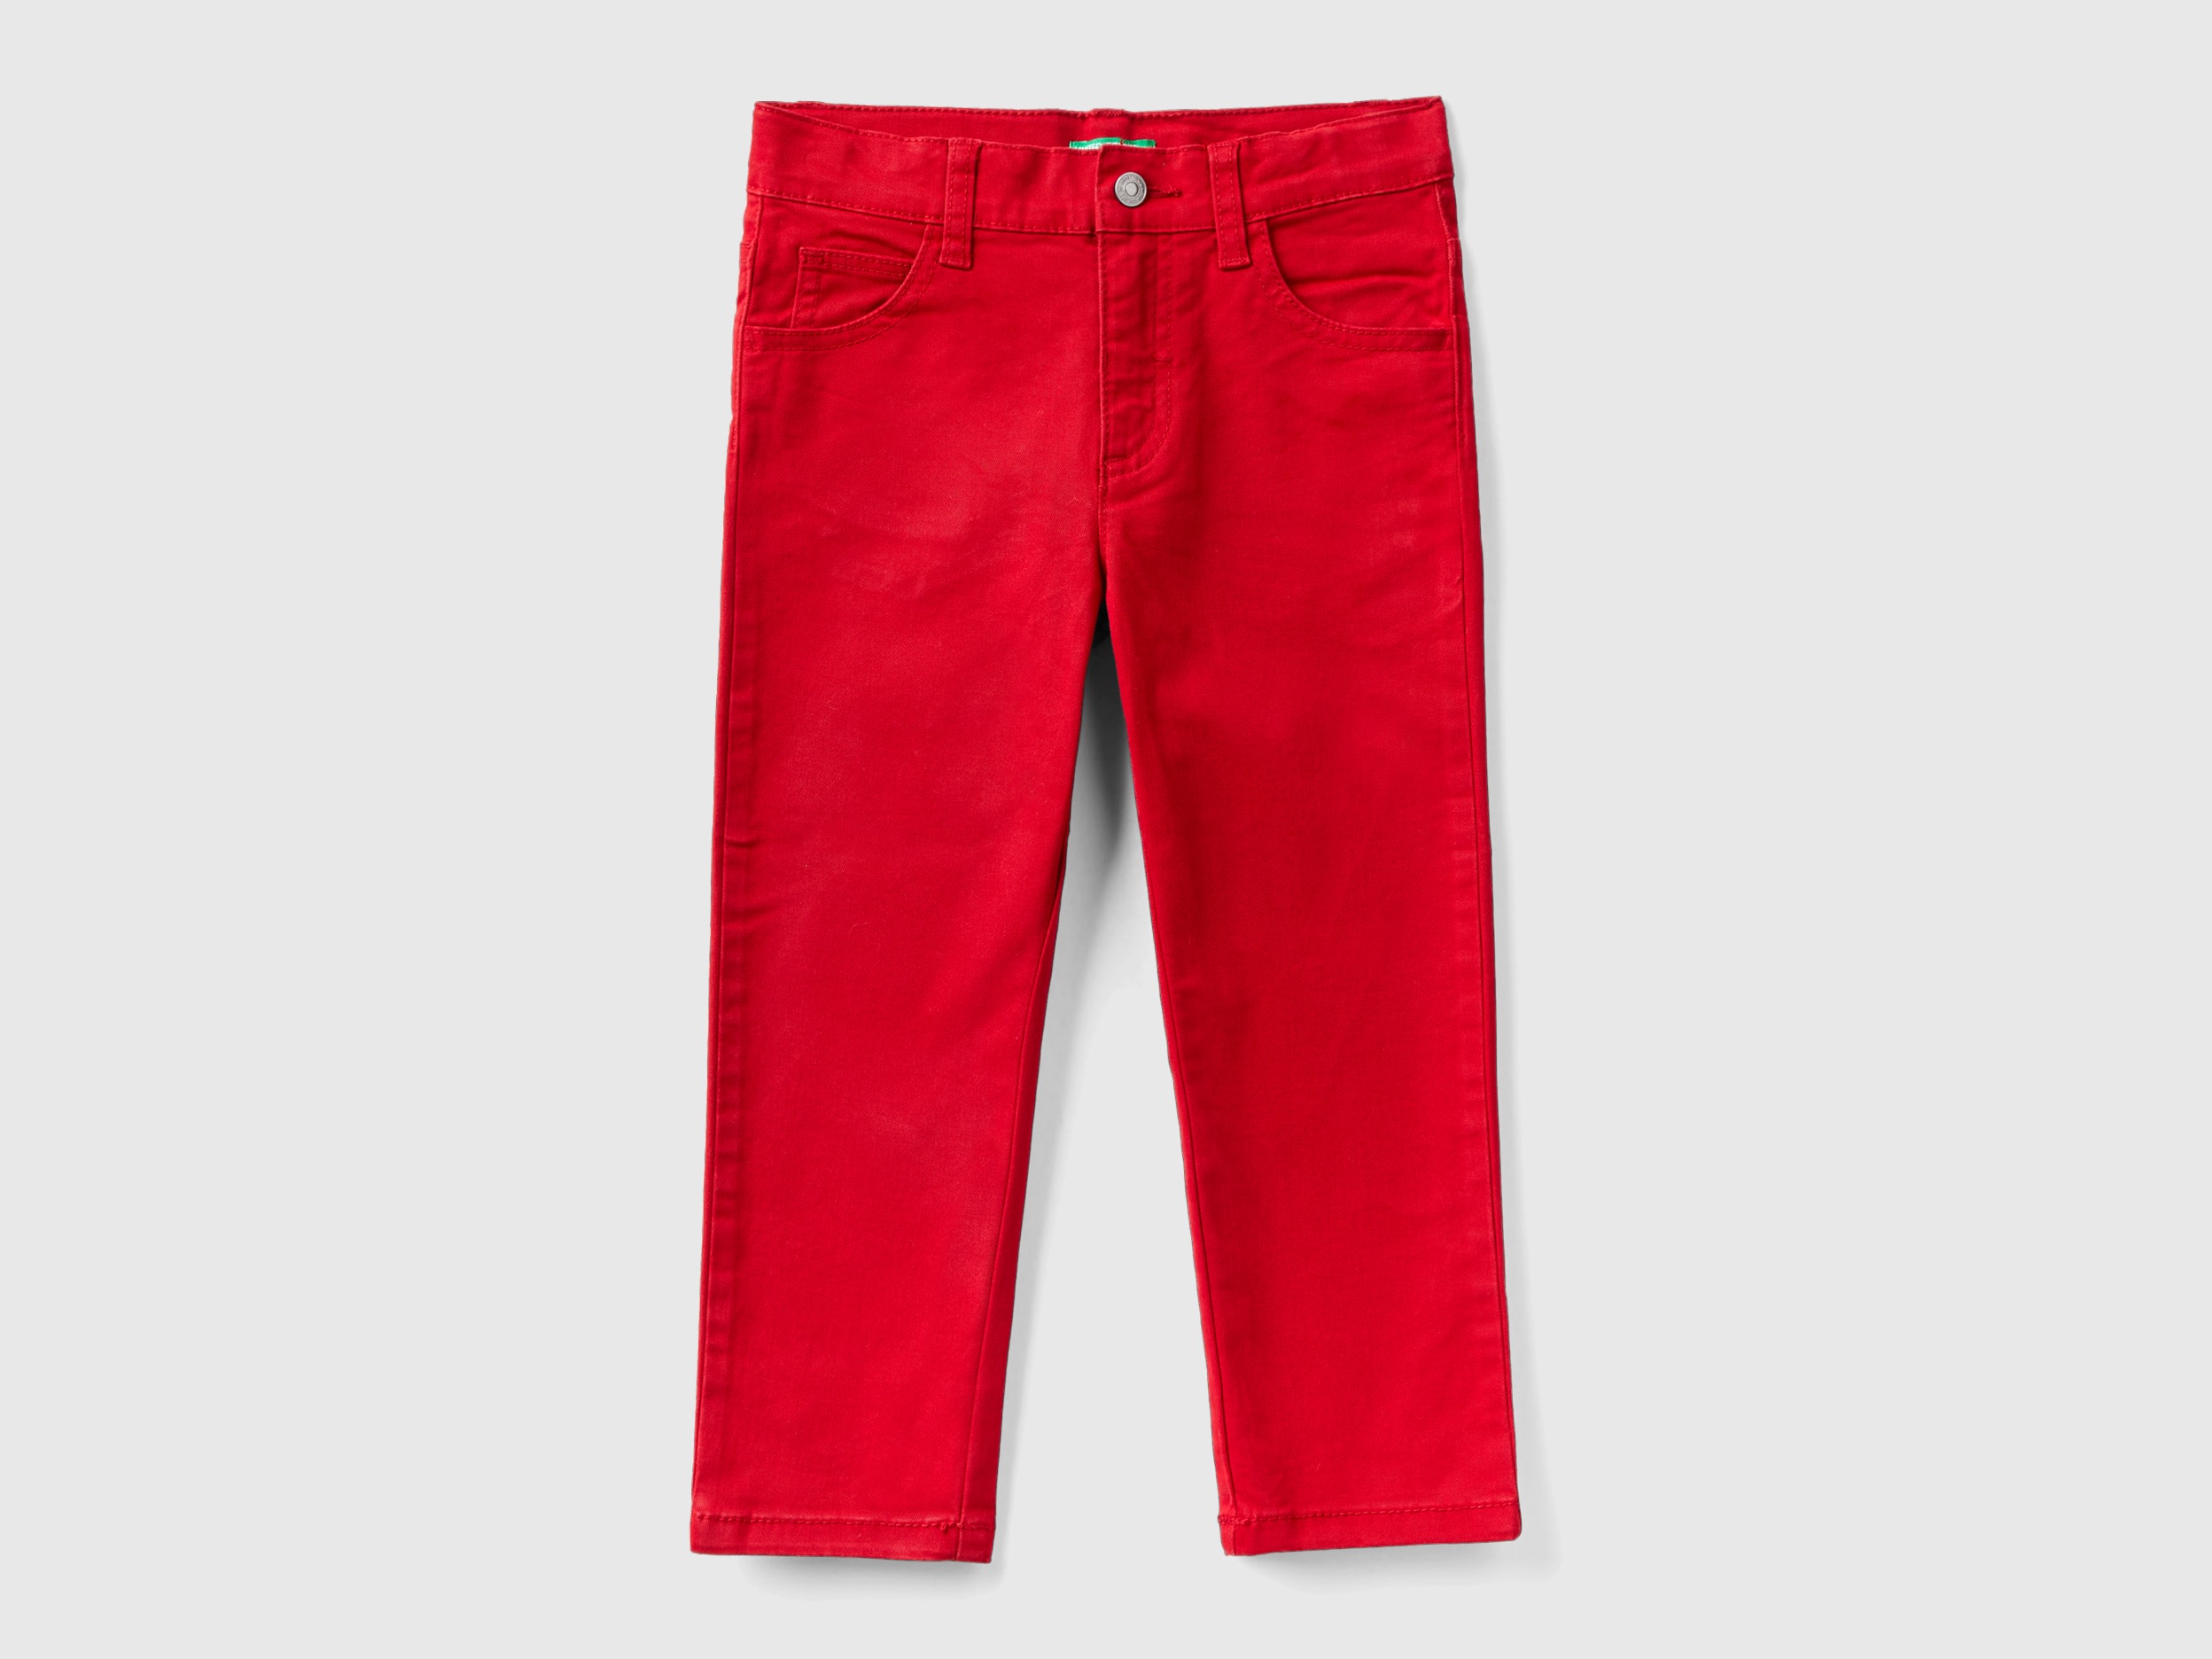 Benetton, Five-pocket Stretch Trousers, size 12-18, Red, Kids